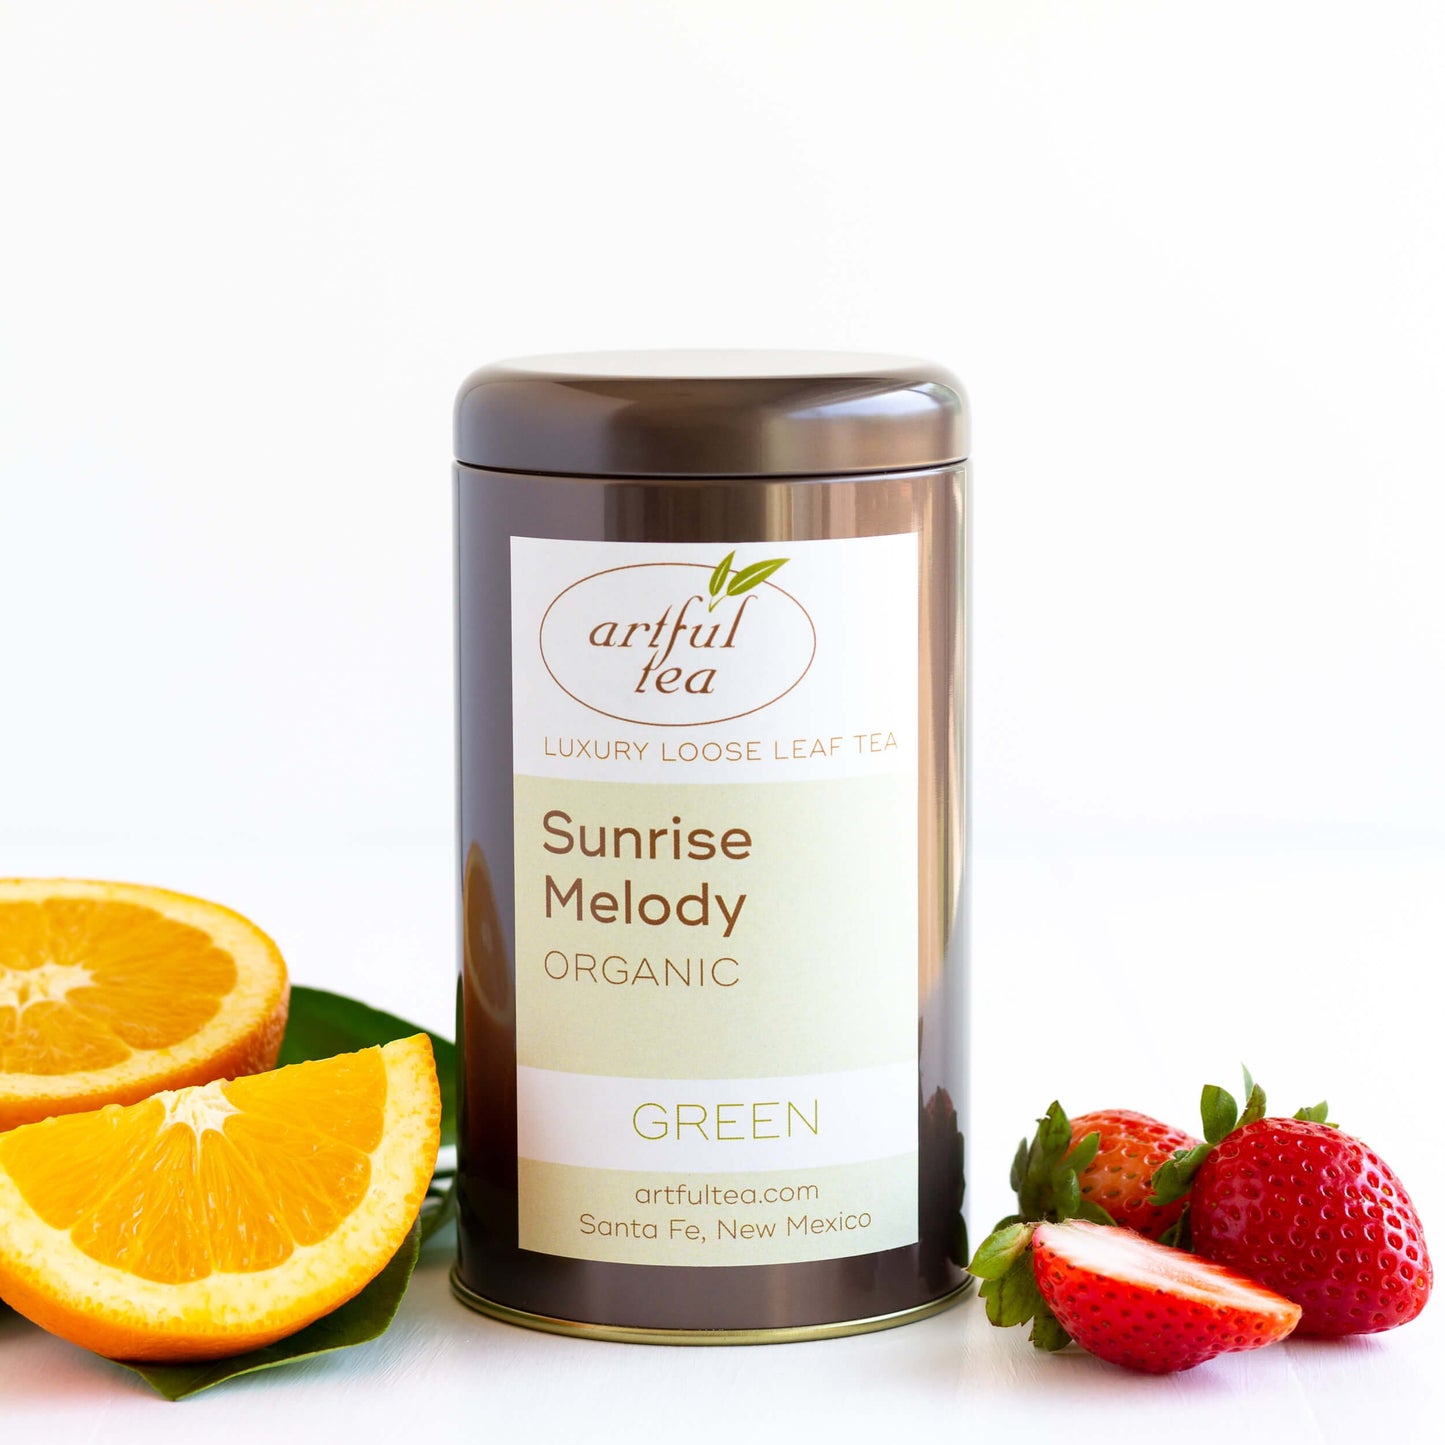 Sunrise Melody Organic Green Tea shown packaged in a brown tin, with strawberries and wedges of orange nearby